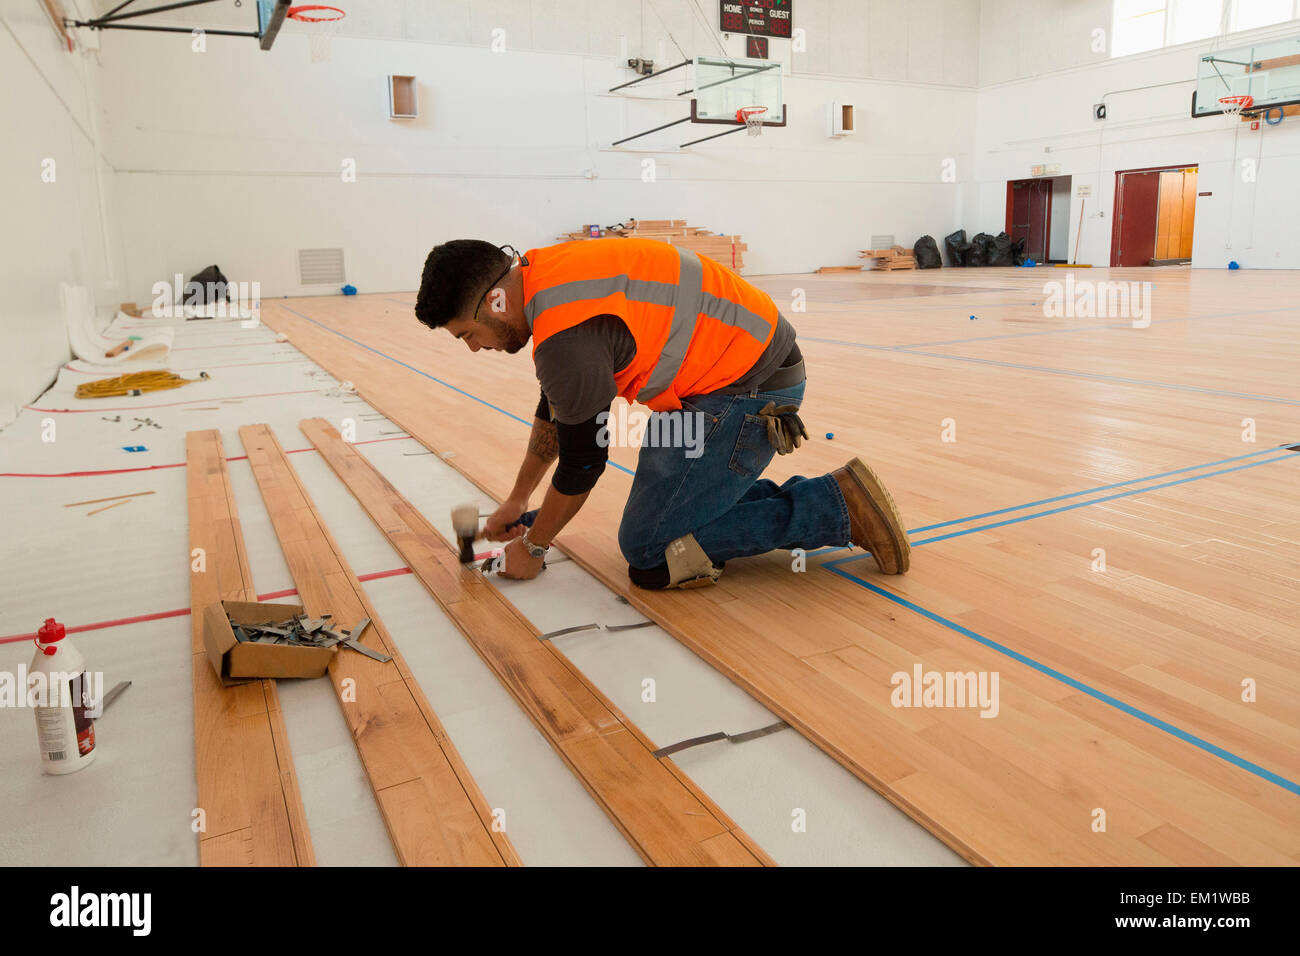 A worker lays maple wood flooring in a basketball court. Stock Photo